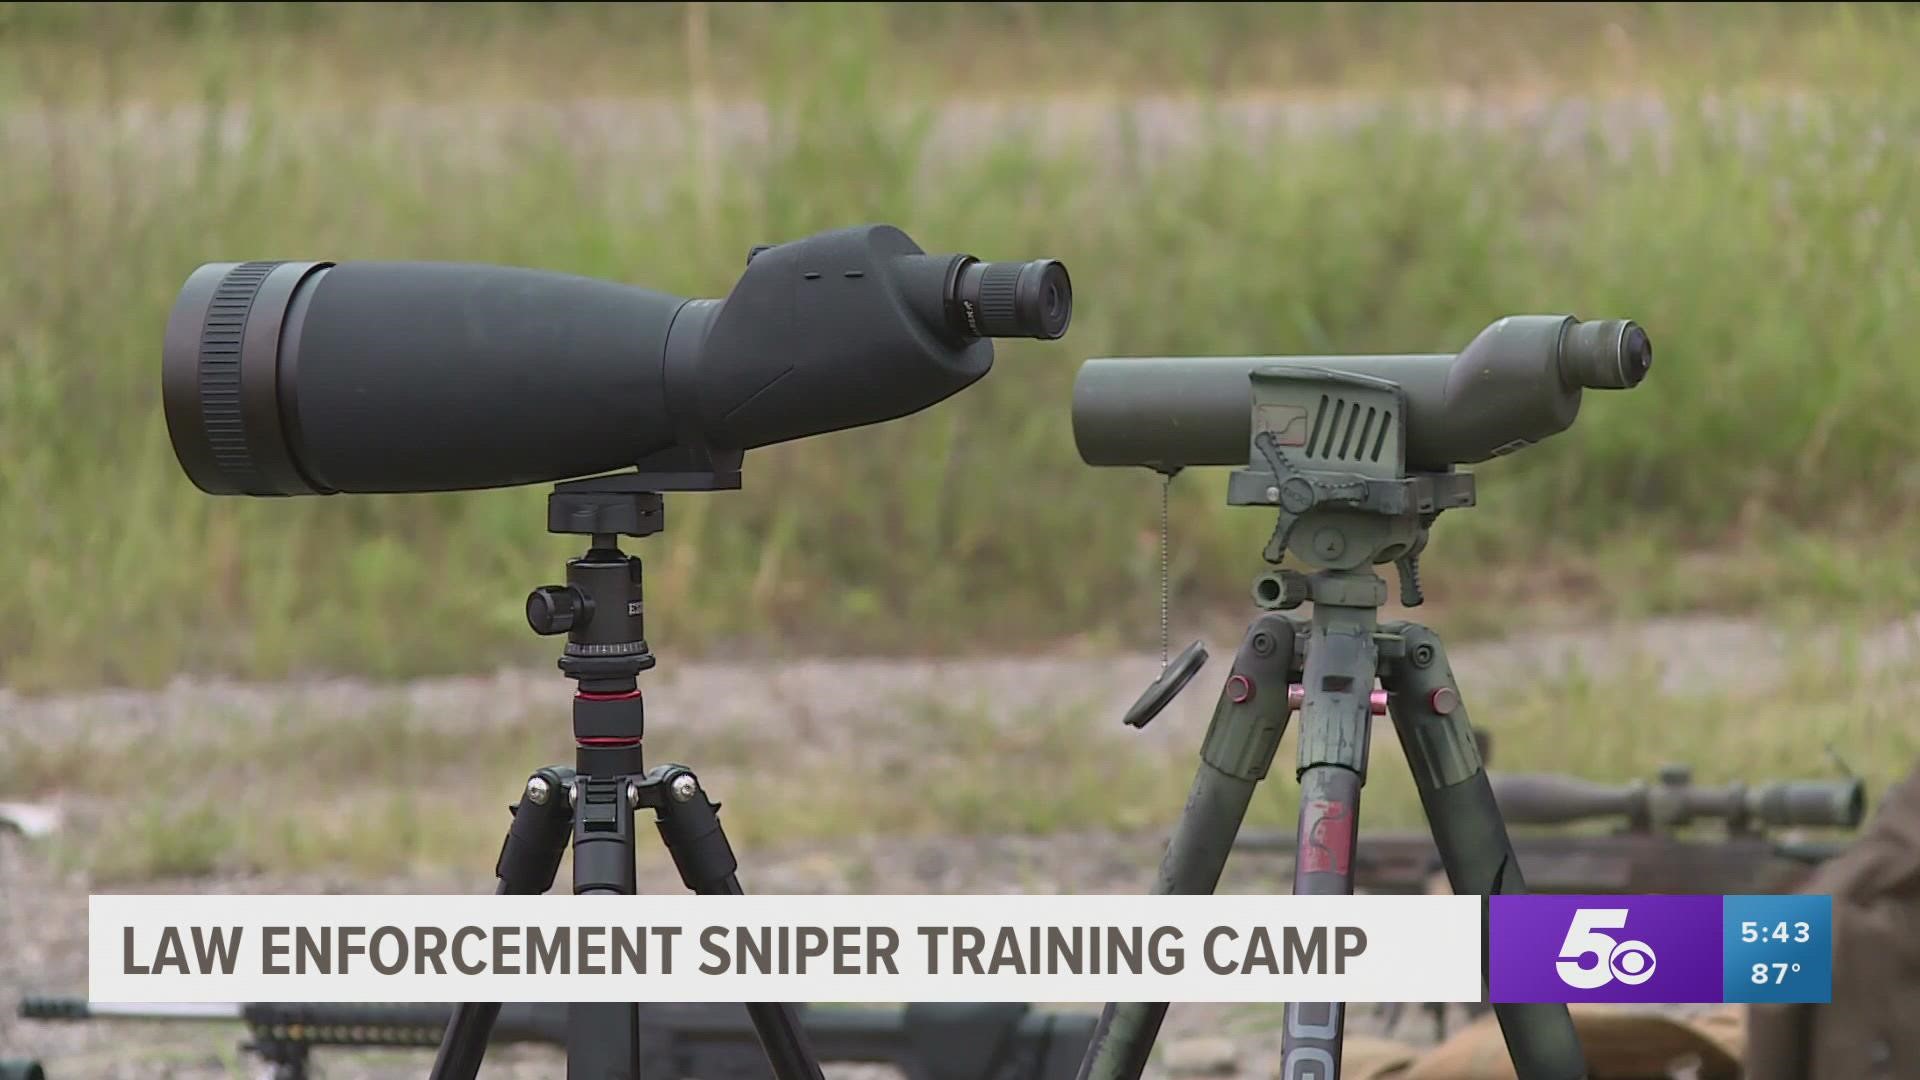 Local law enforcement attended sniper training camp.